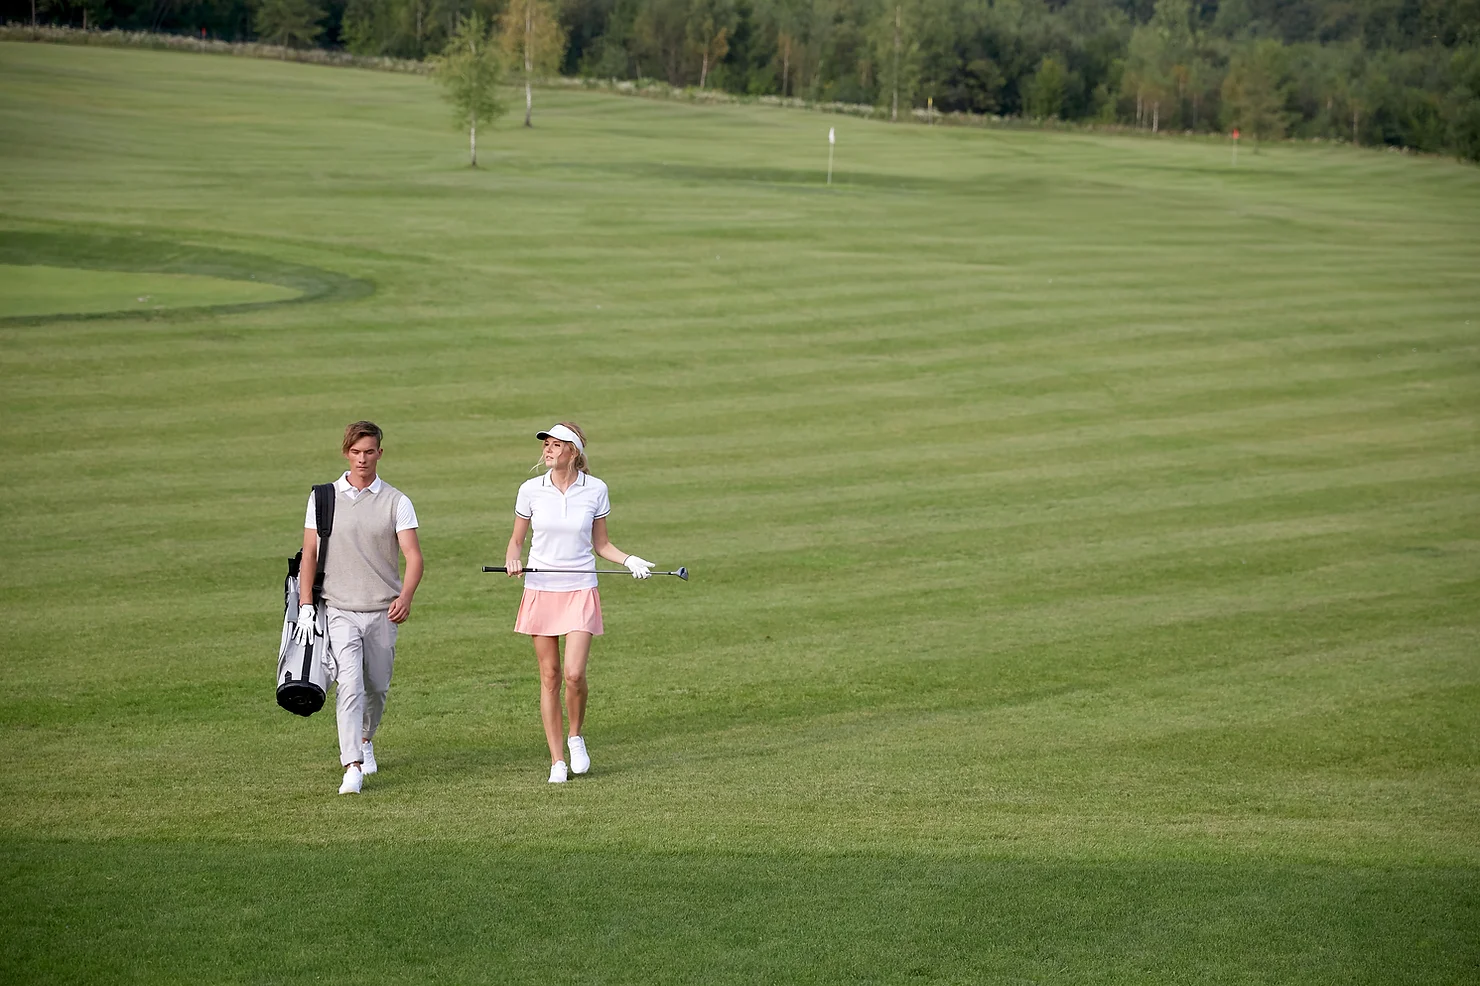 Two golfers enjoying a day at the golf course